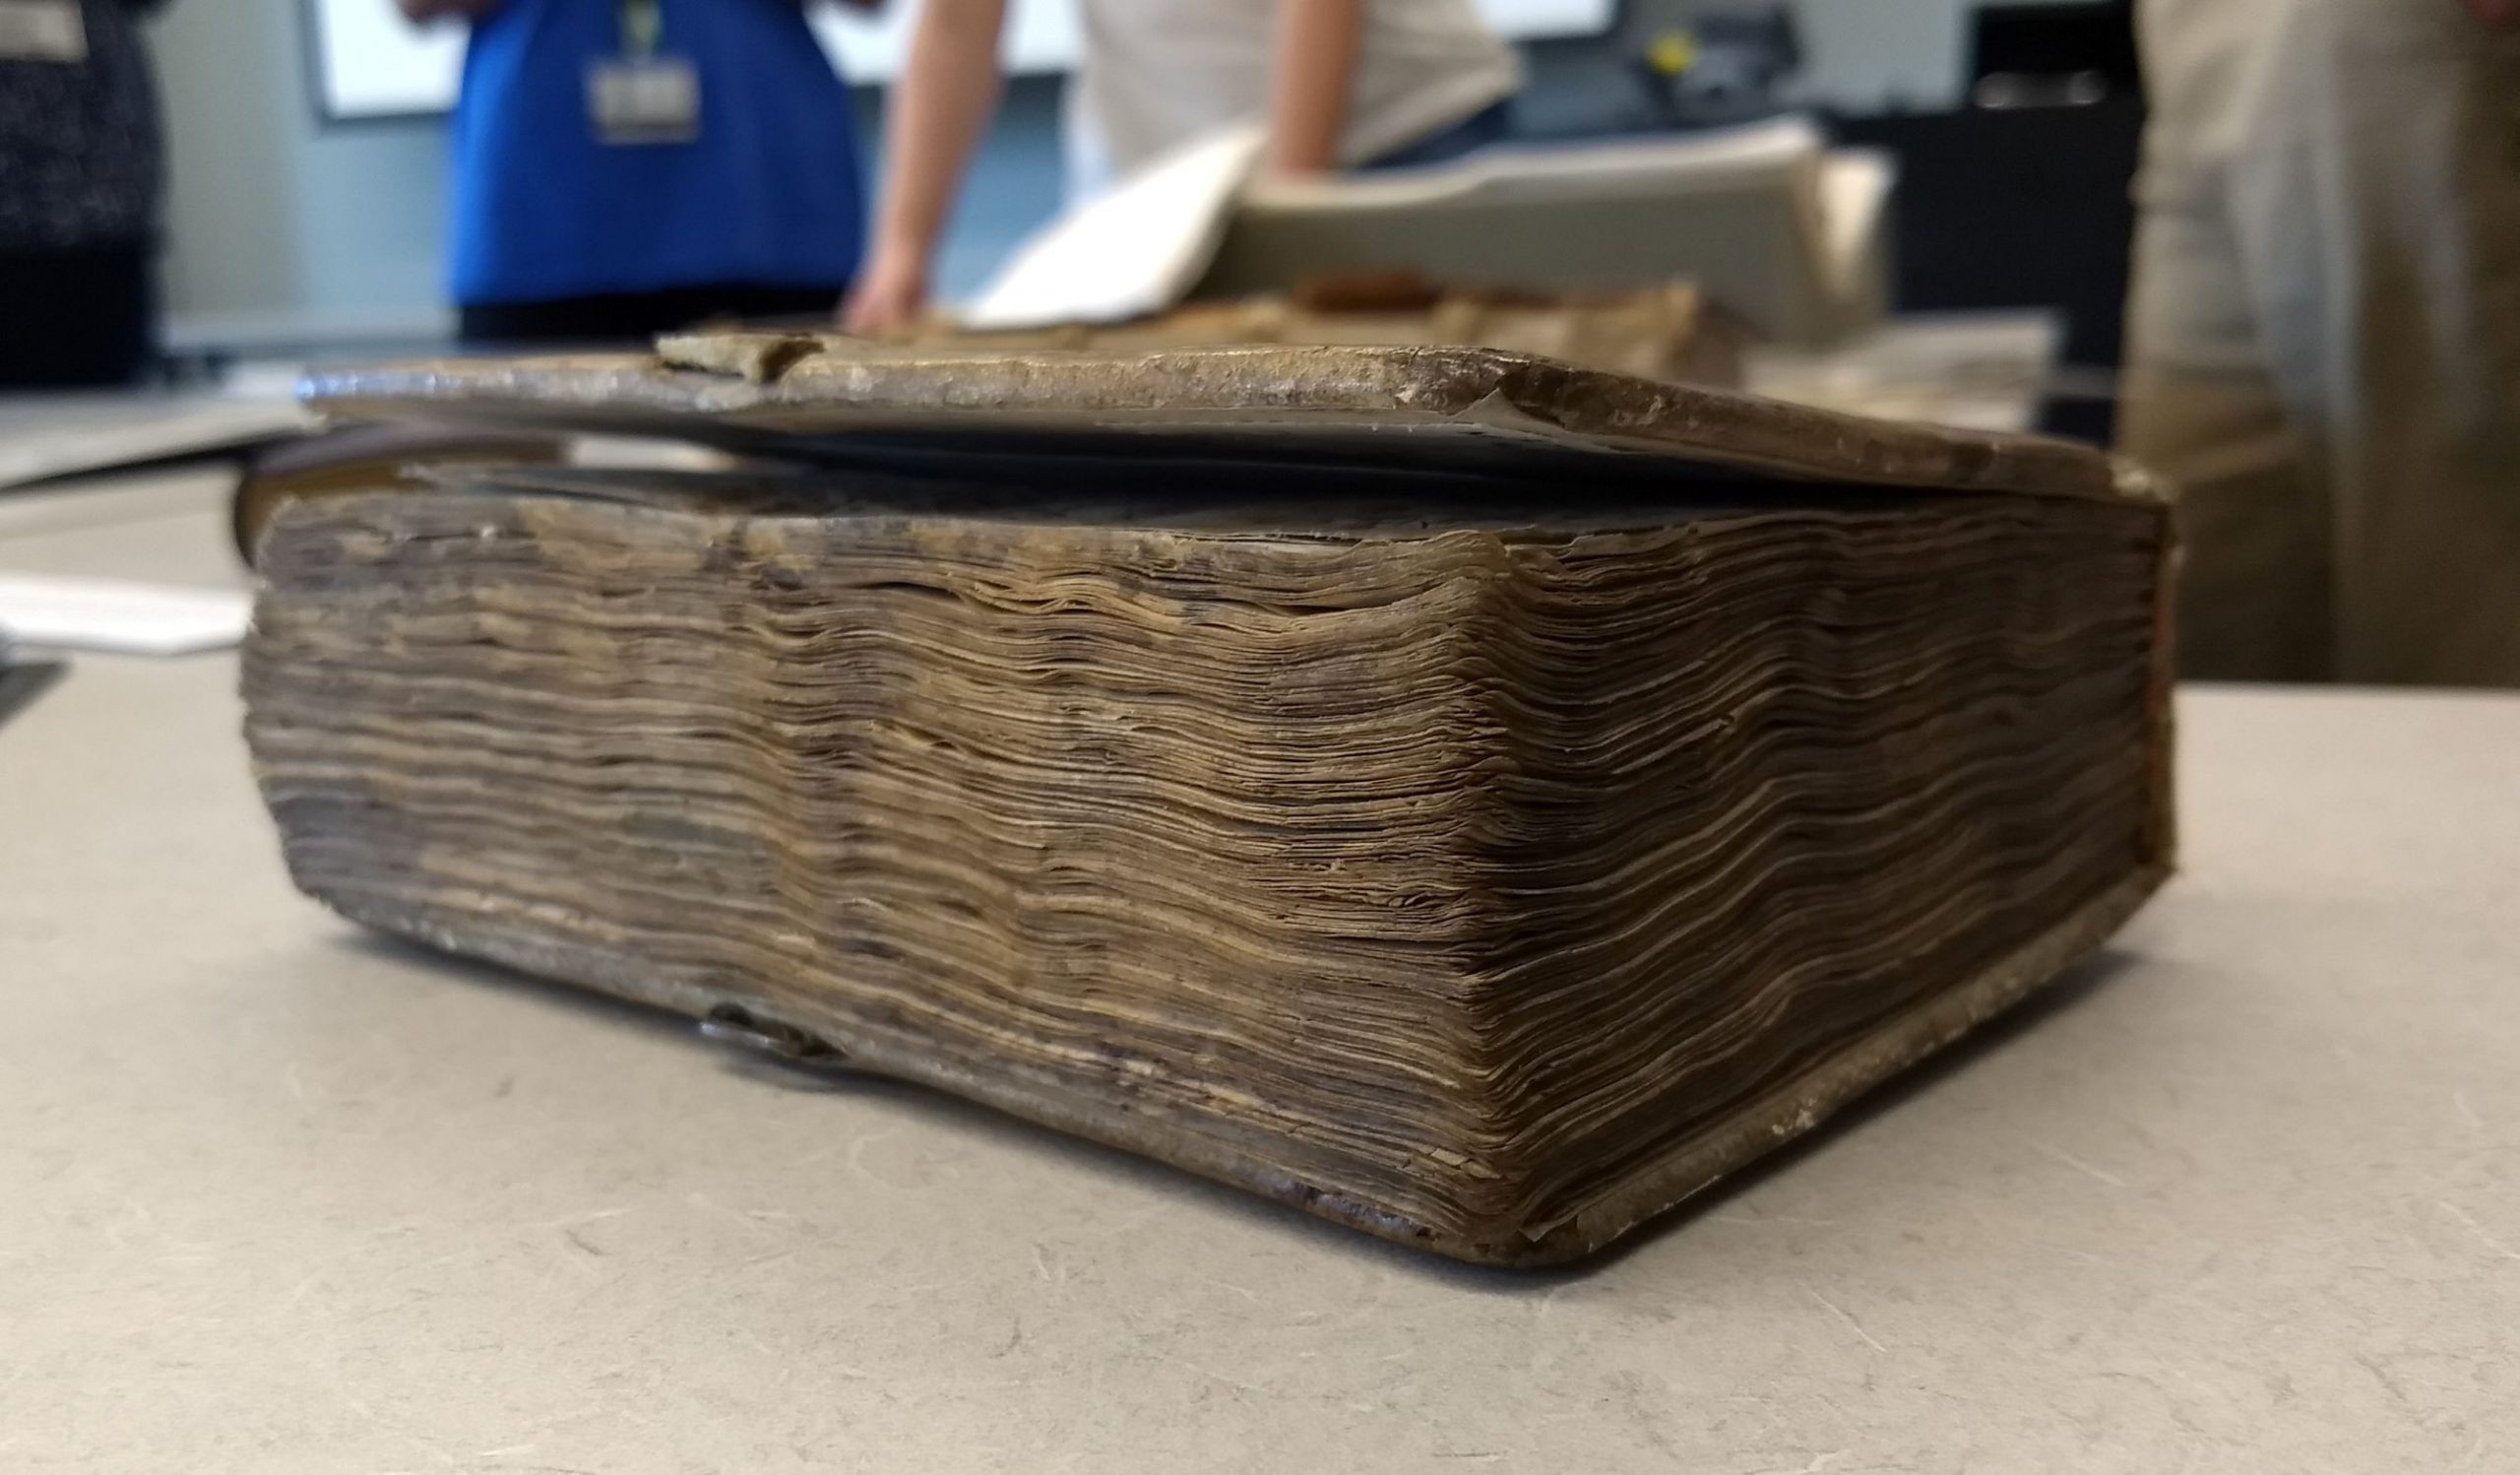 The fore edge of a very old book, lying on a table.